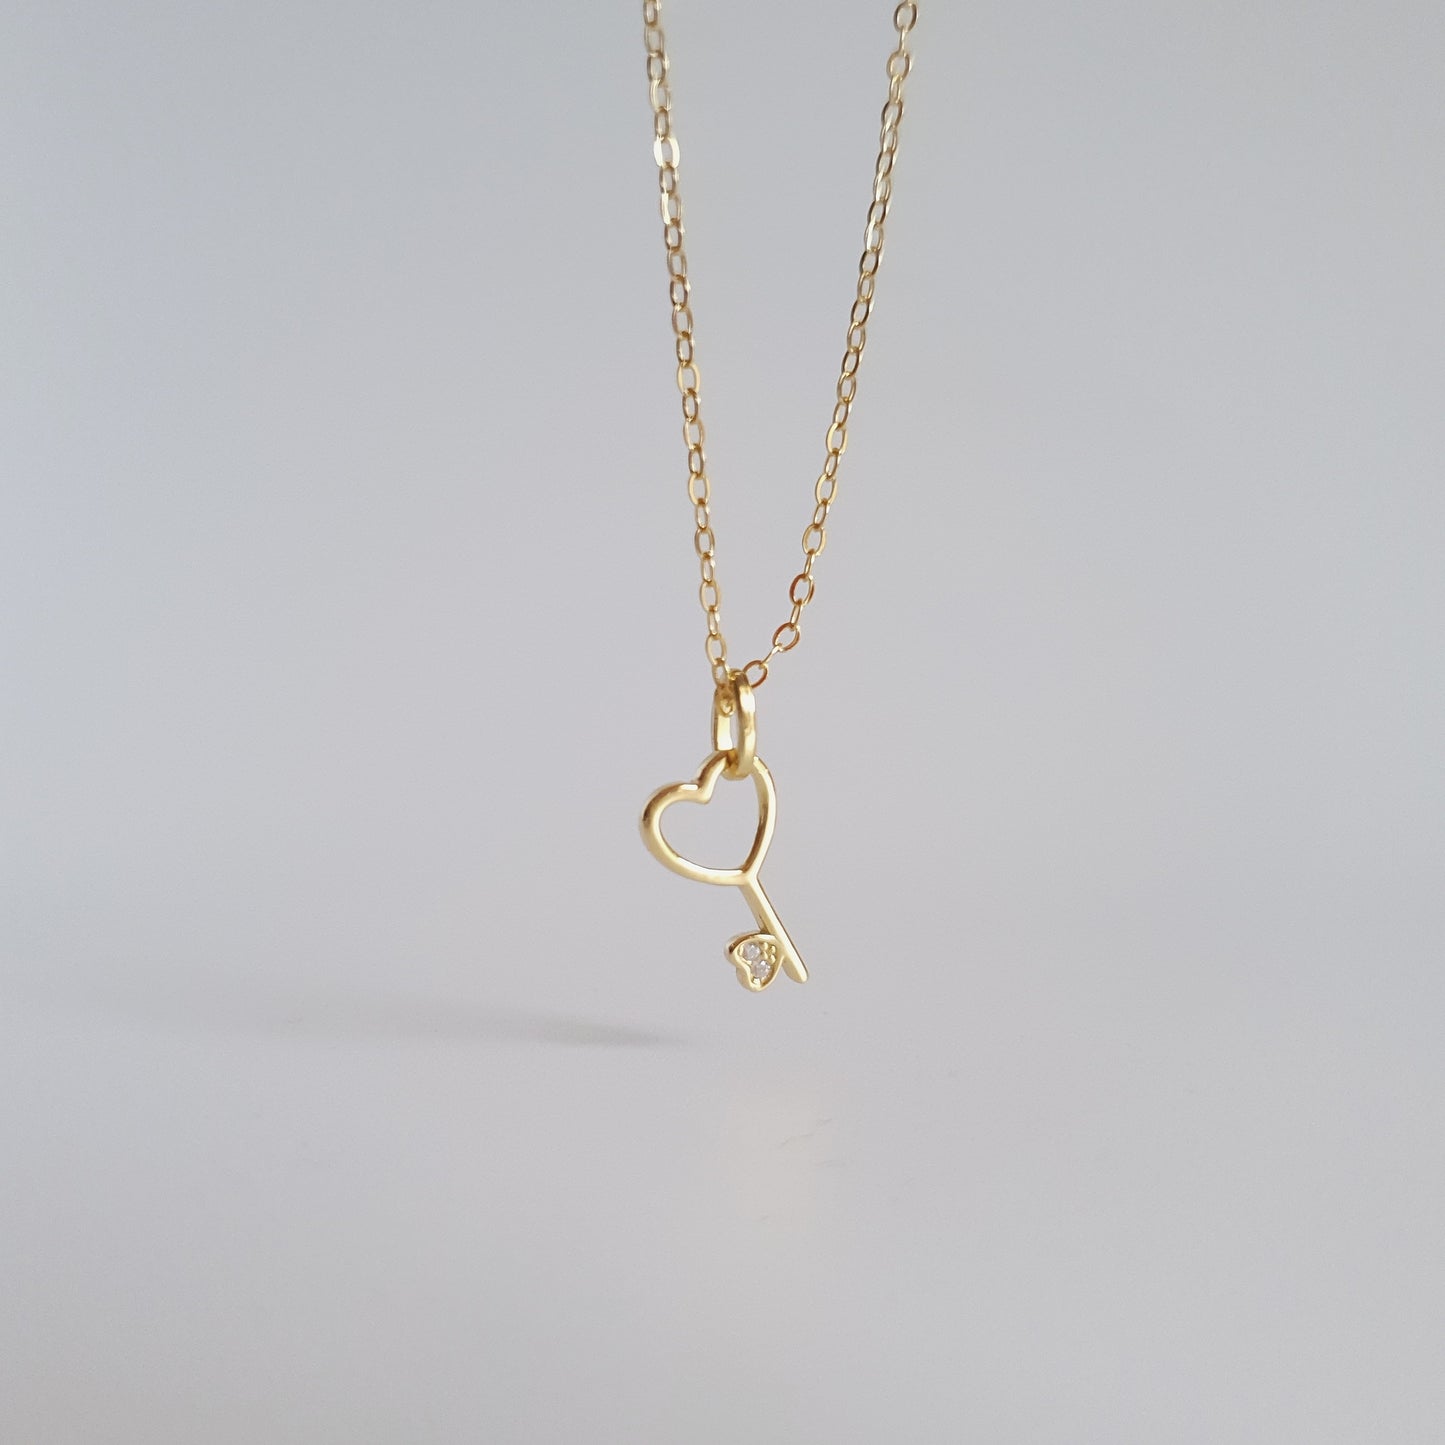 The Love Key Necklace